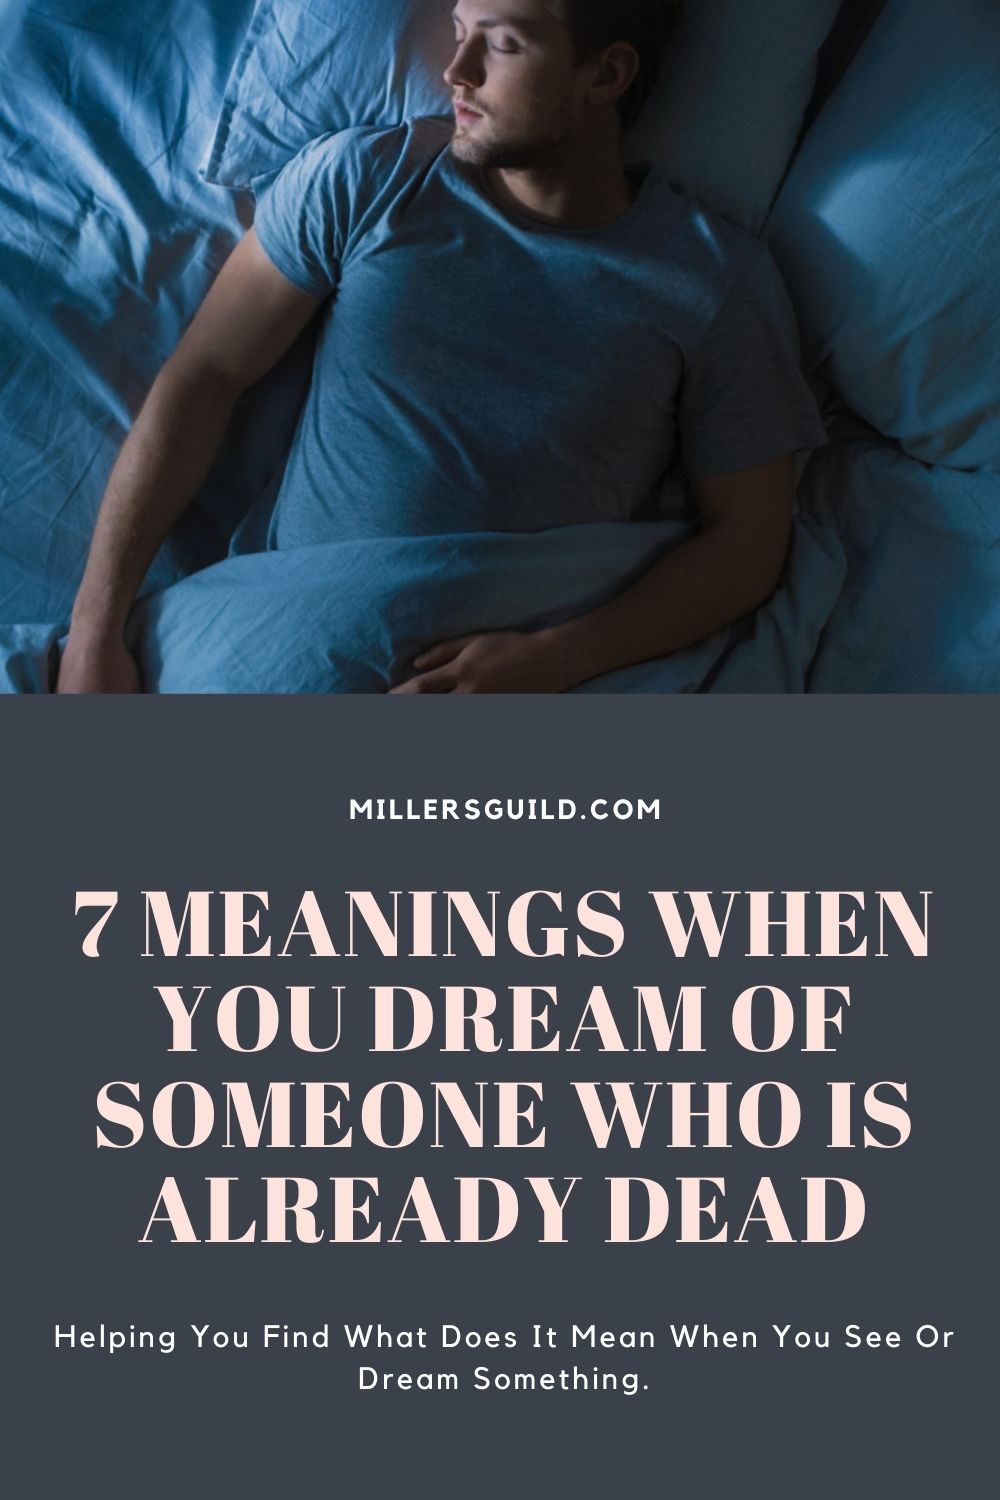 What Does it Mean When Dream of Someone Who Is Already Dead